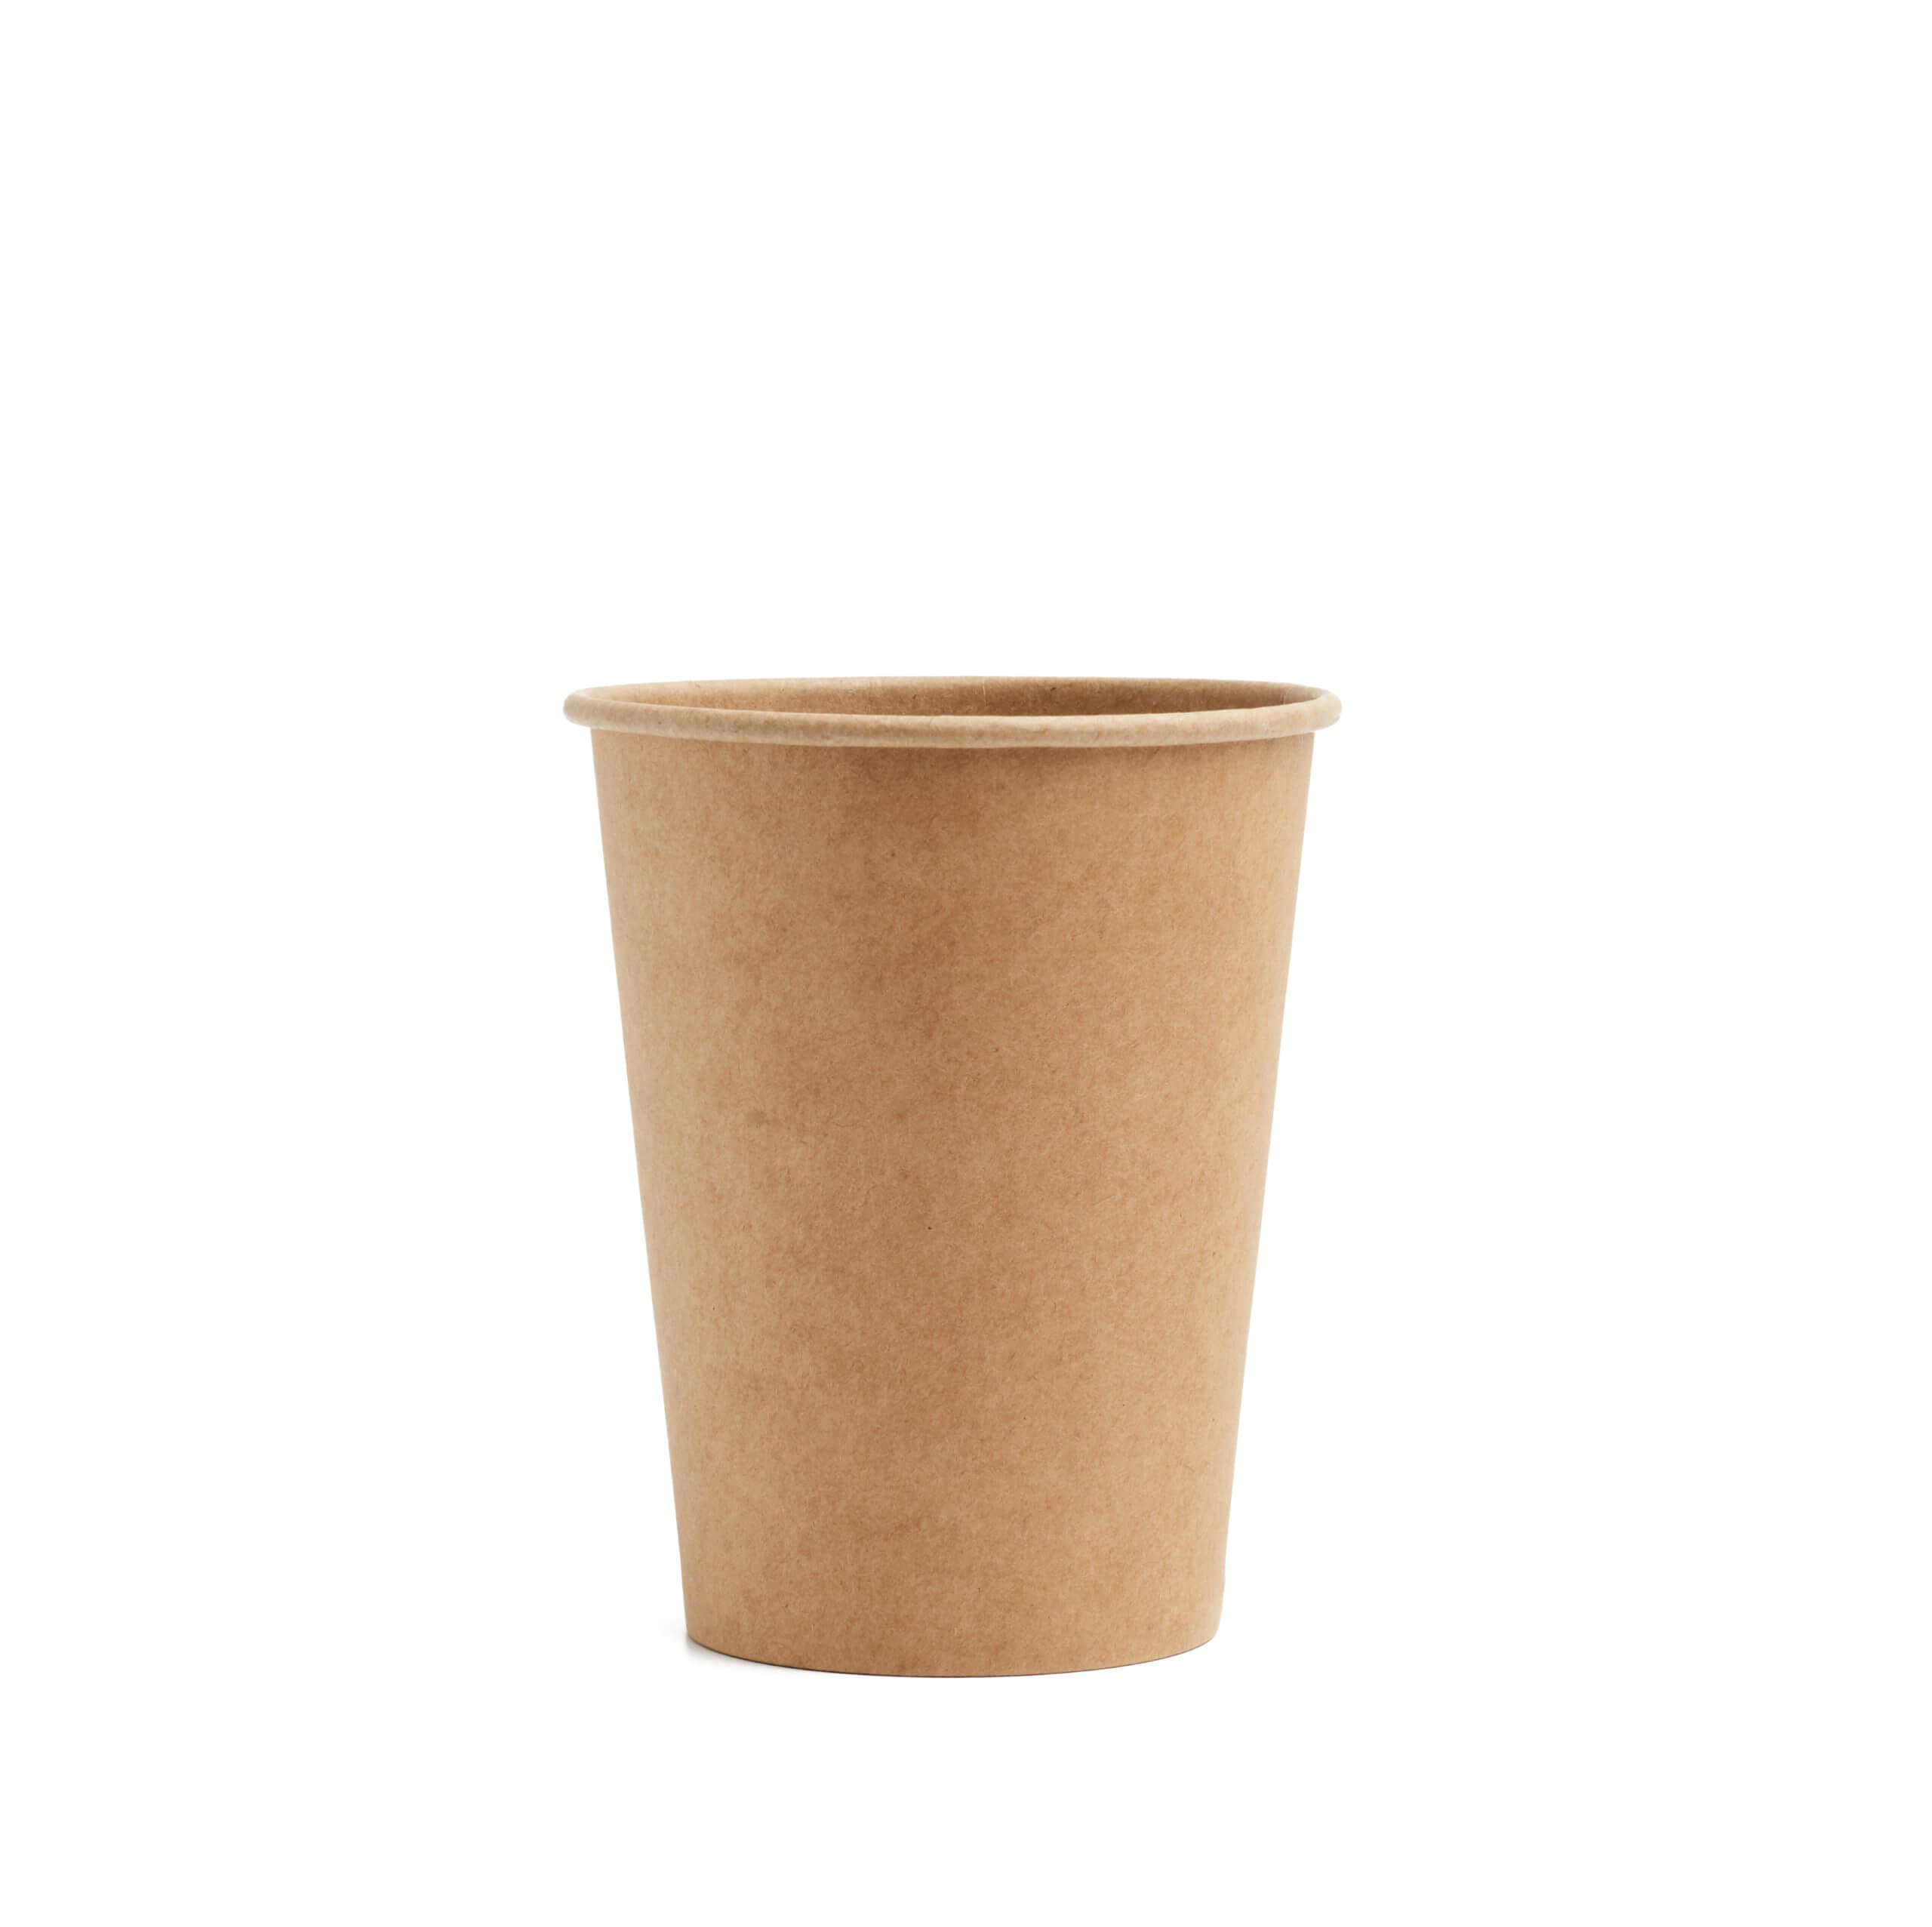 An image of one of our Paper Takeaway Cups.